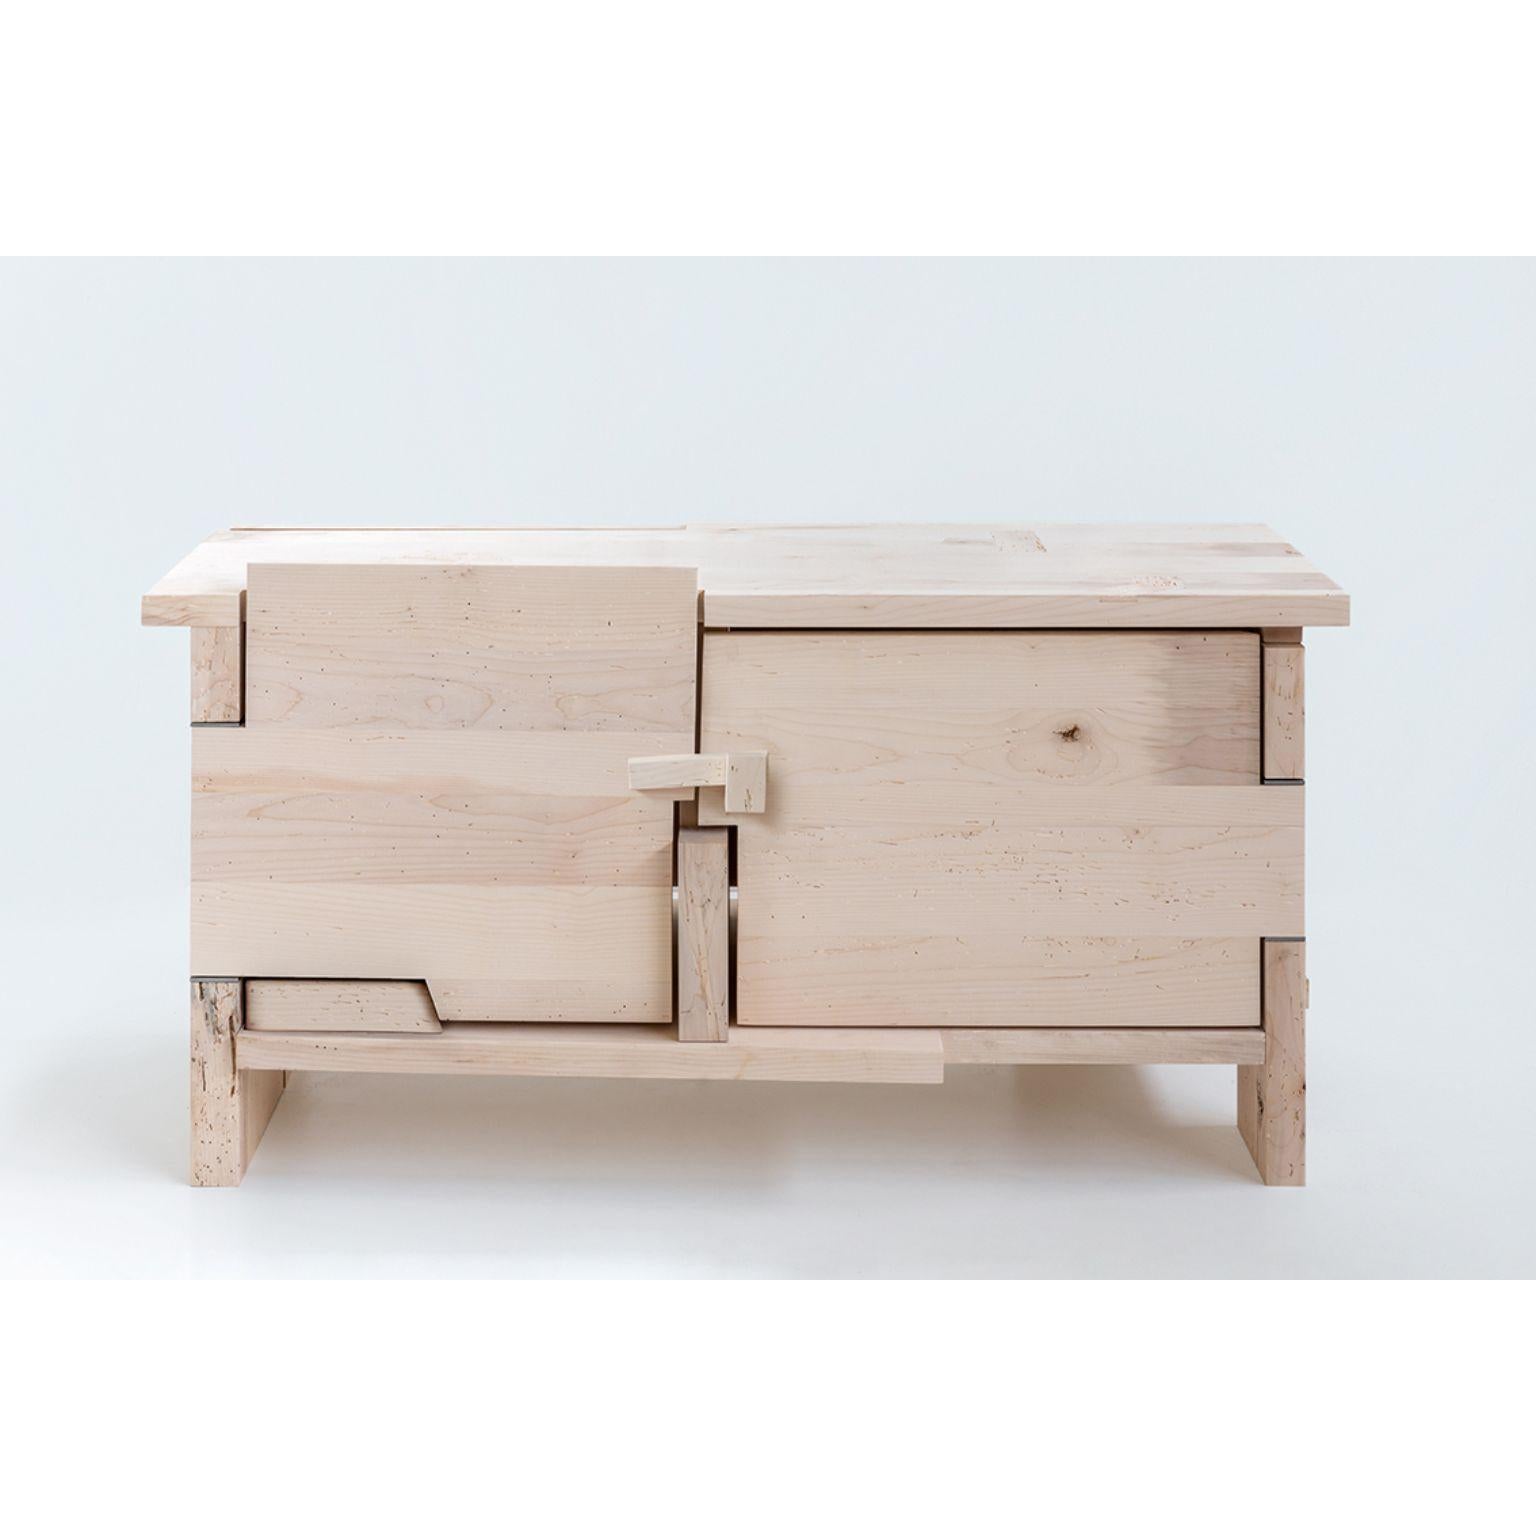 Altamira Side Table by Secondome Edizioni and Studio F
Designer: Simone Fanciullacci.
Dimensions: D 54 x W 140 x H 73 cm.
Materials: Solid woodworm maple wood.

Collection / Production: Secondome + Studio F. This buffet can also be used as a side